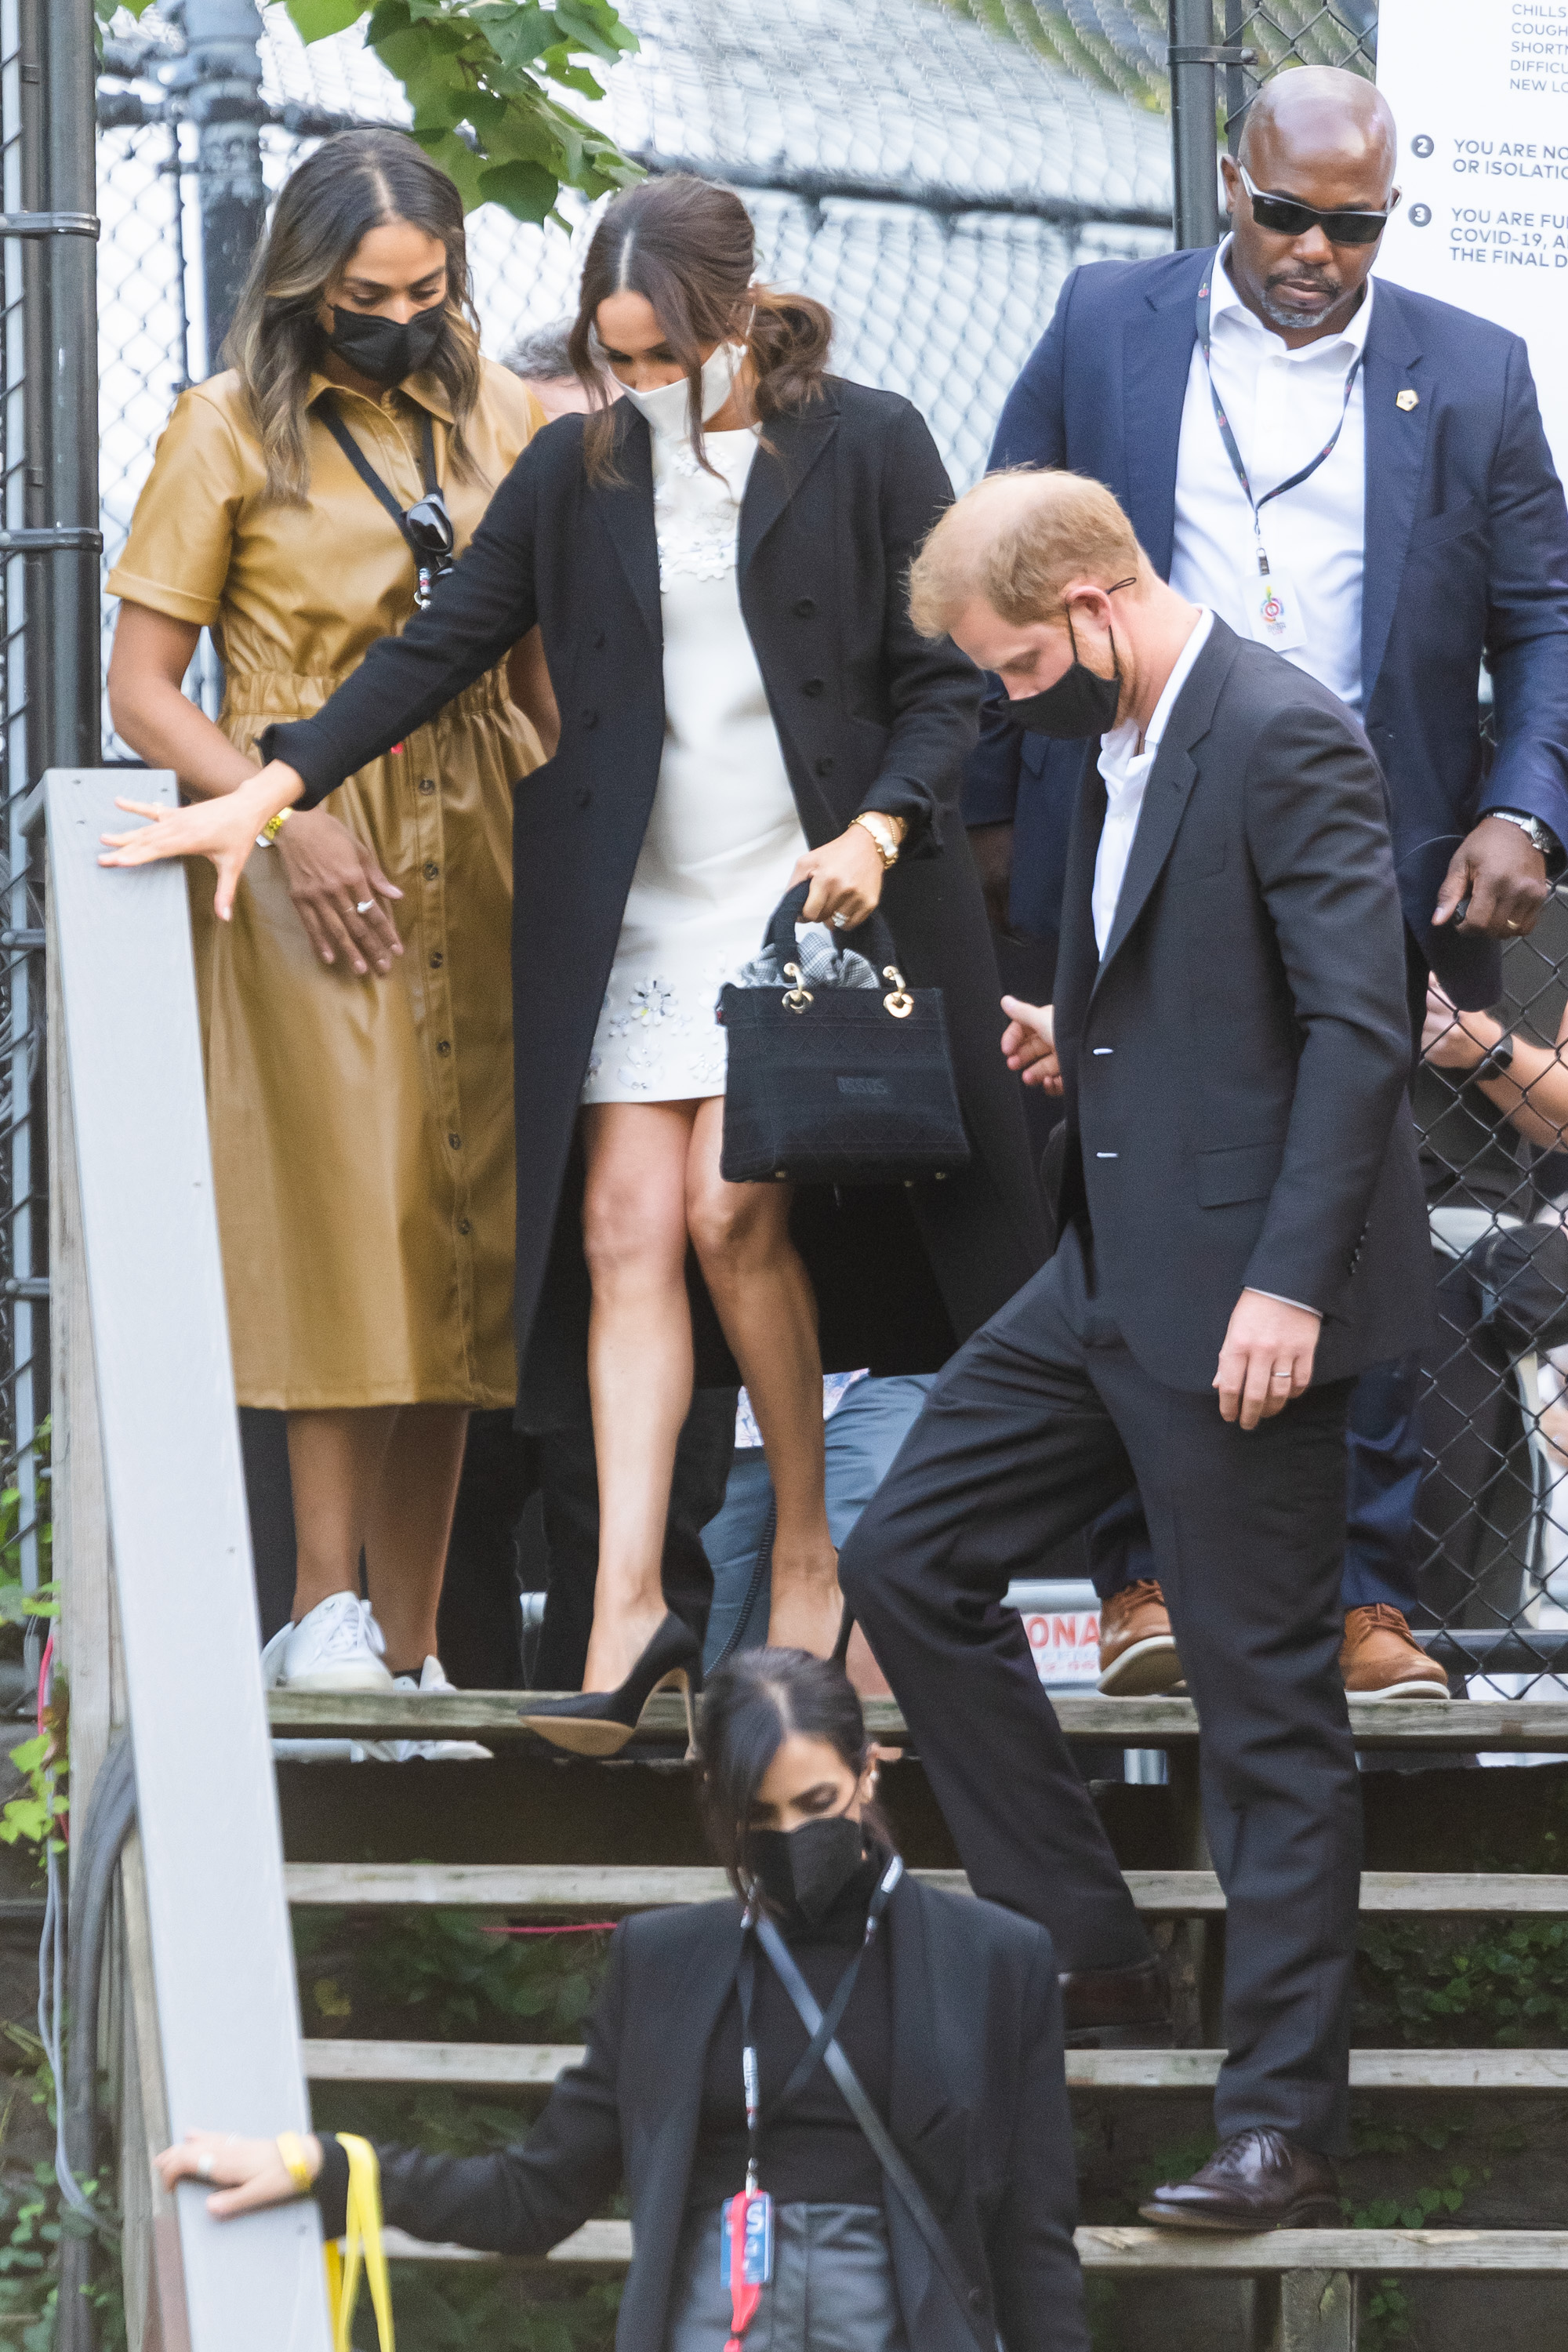 Meghan Markle and Prince Harry walking down steps after they depart the Global Citizen concert in Central Park